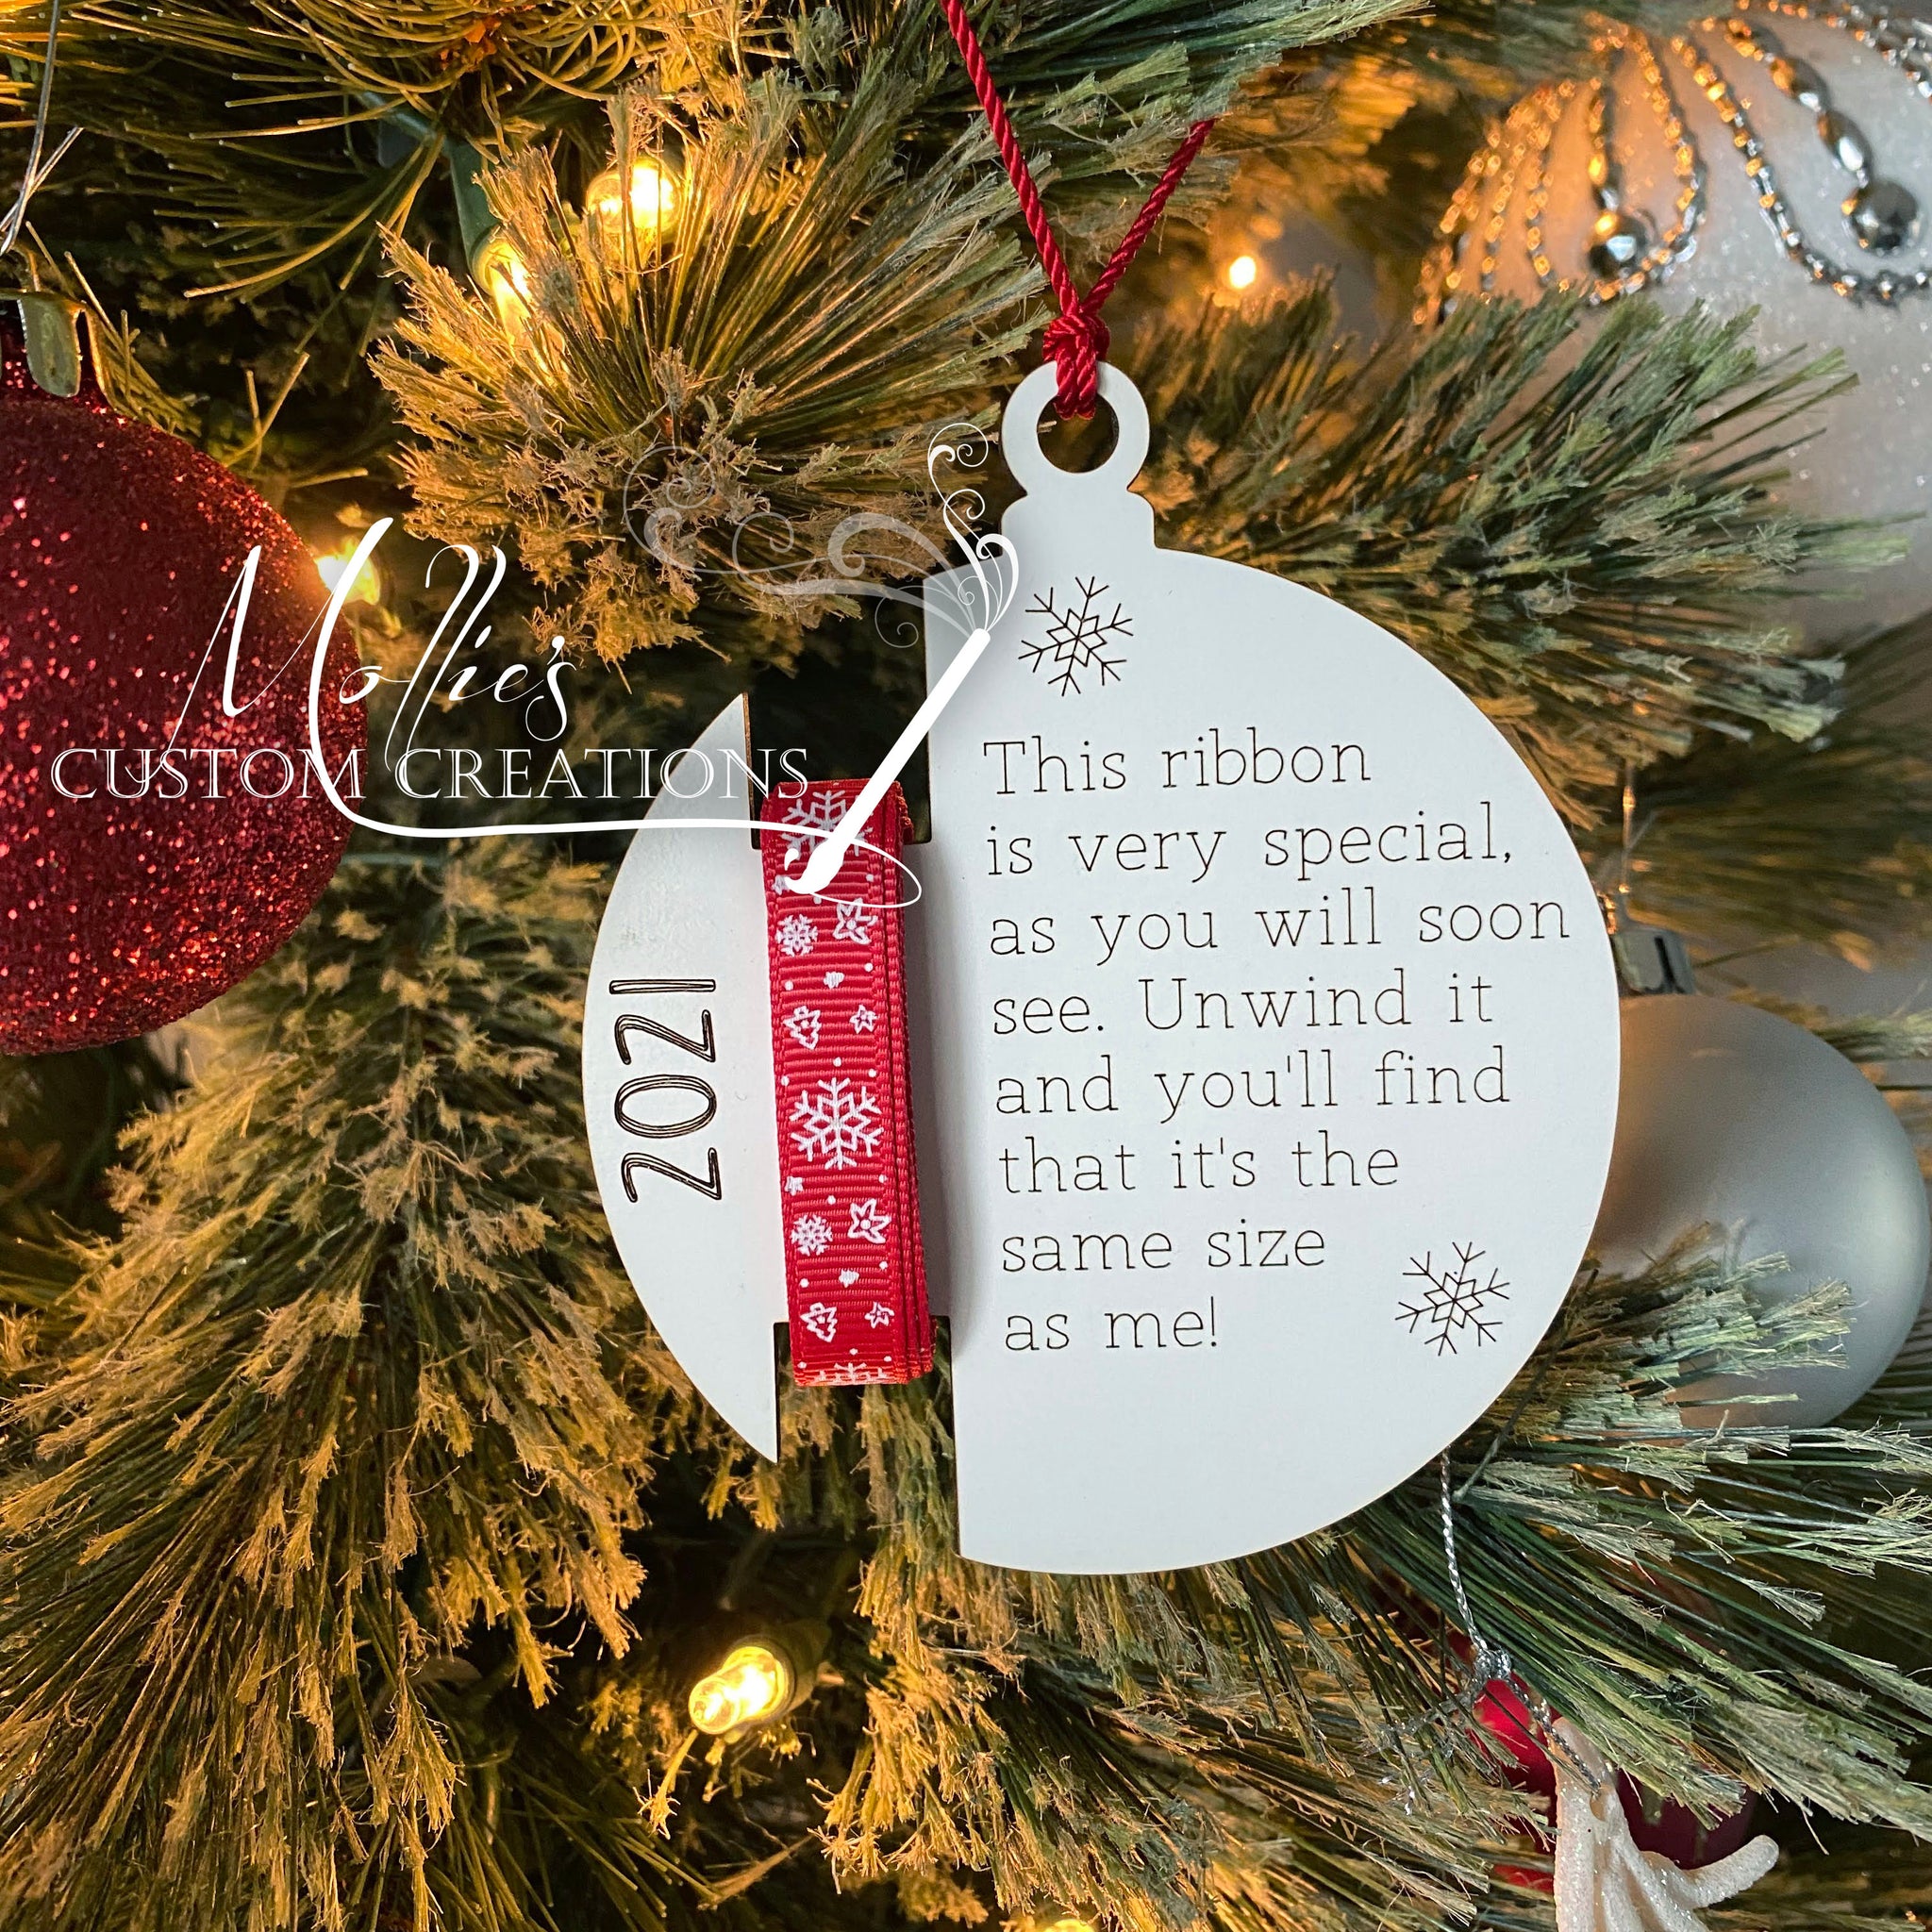 Personalized Ribbon Height Ornament, SNOWMAN  Wooden Christmas orname –  Mollie's Custom Creations